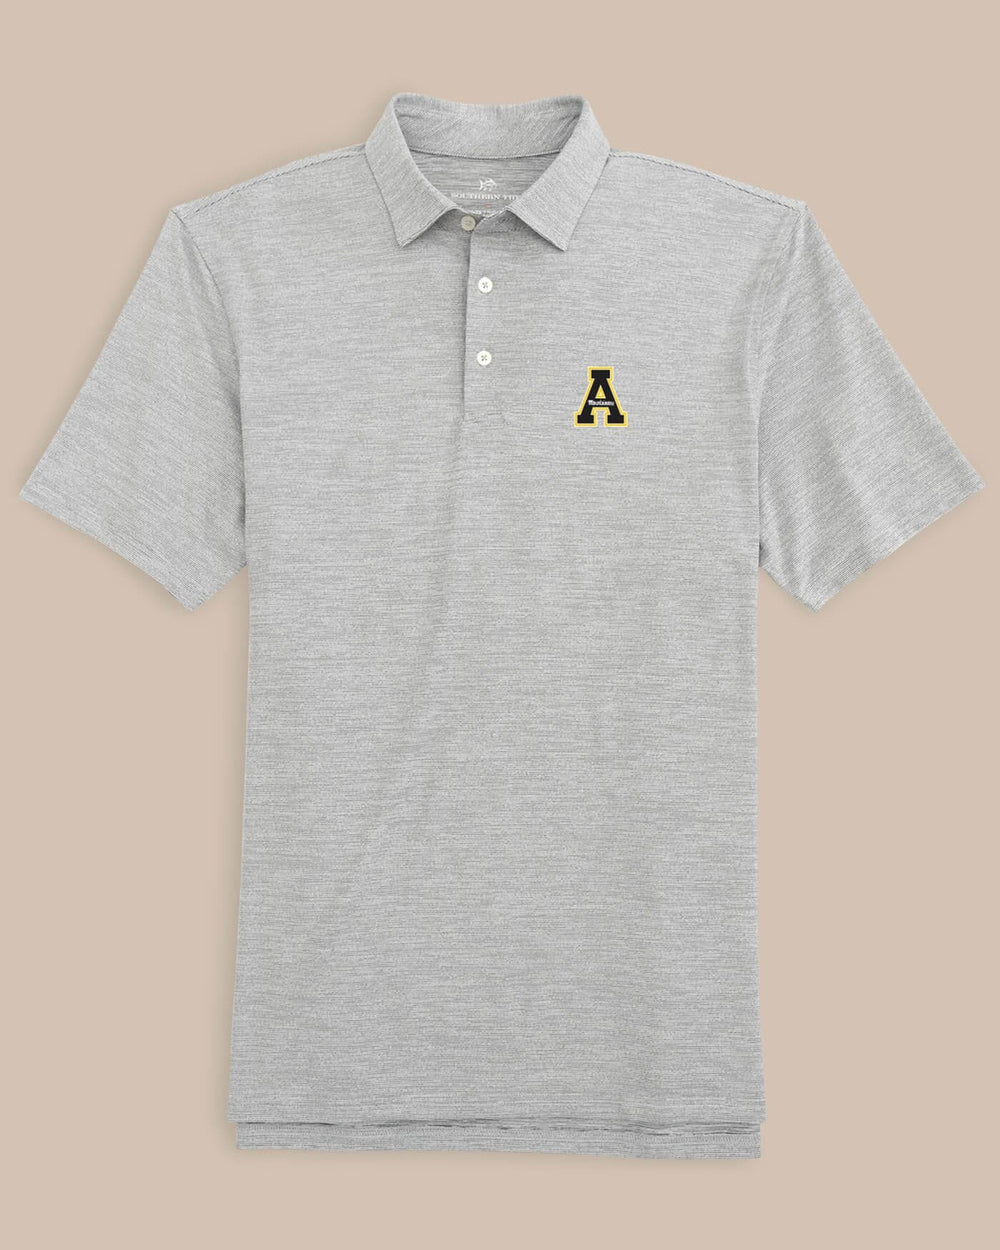 The front of the Appalachian State Driver Spacedye Polo by Southern Tide - Black